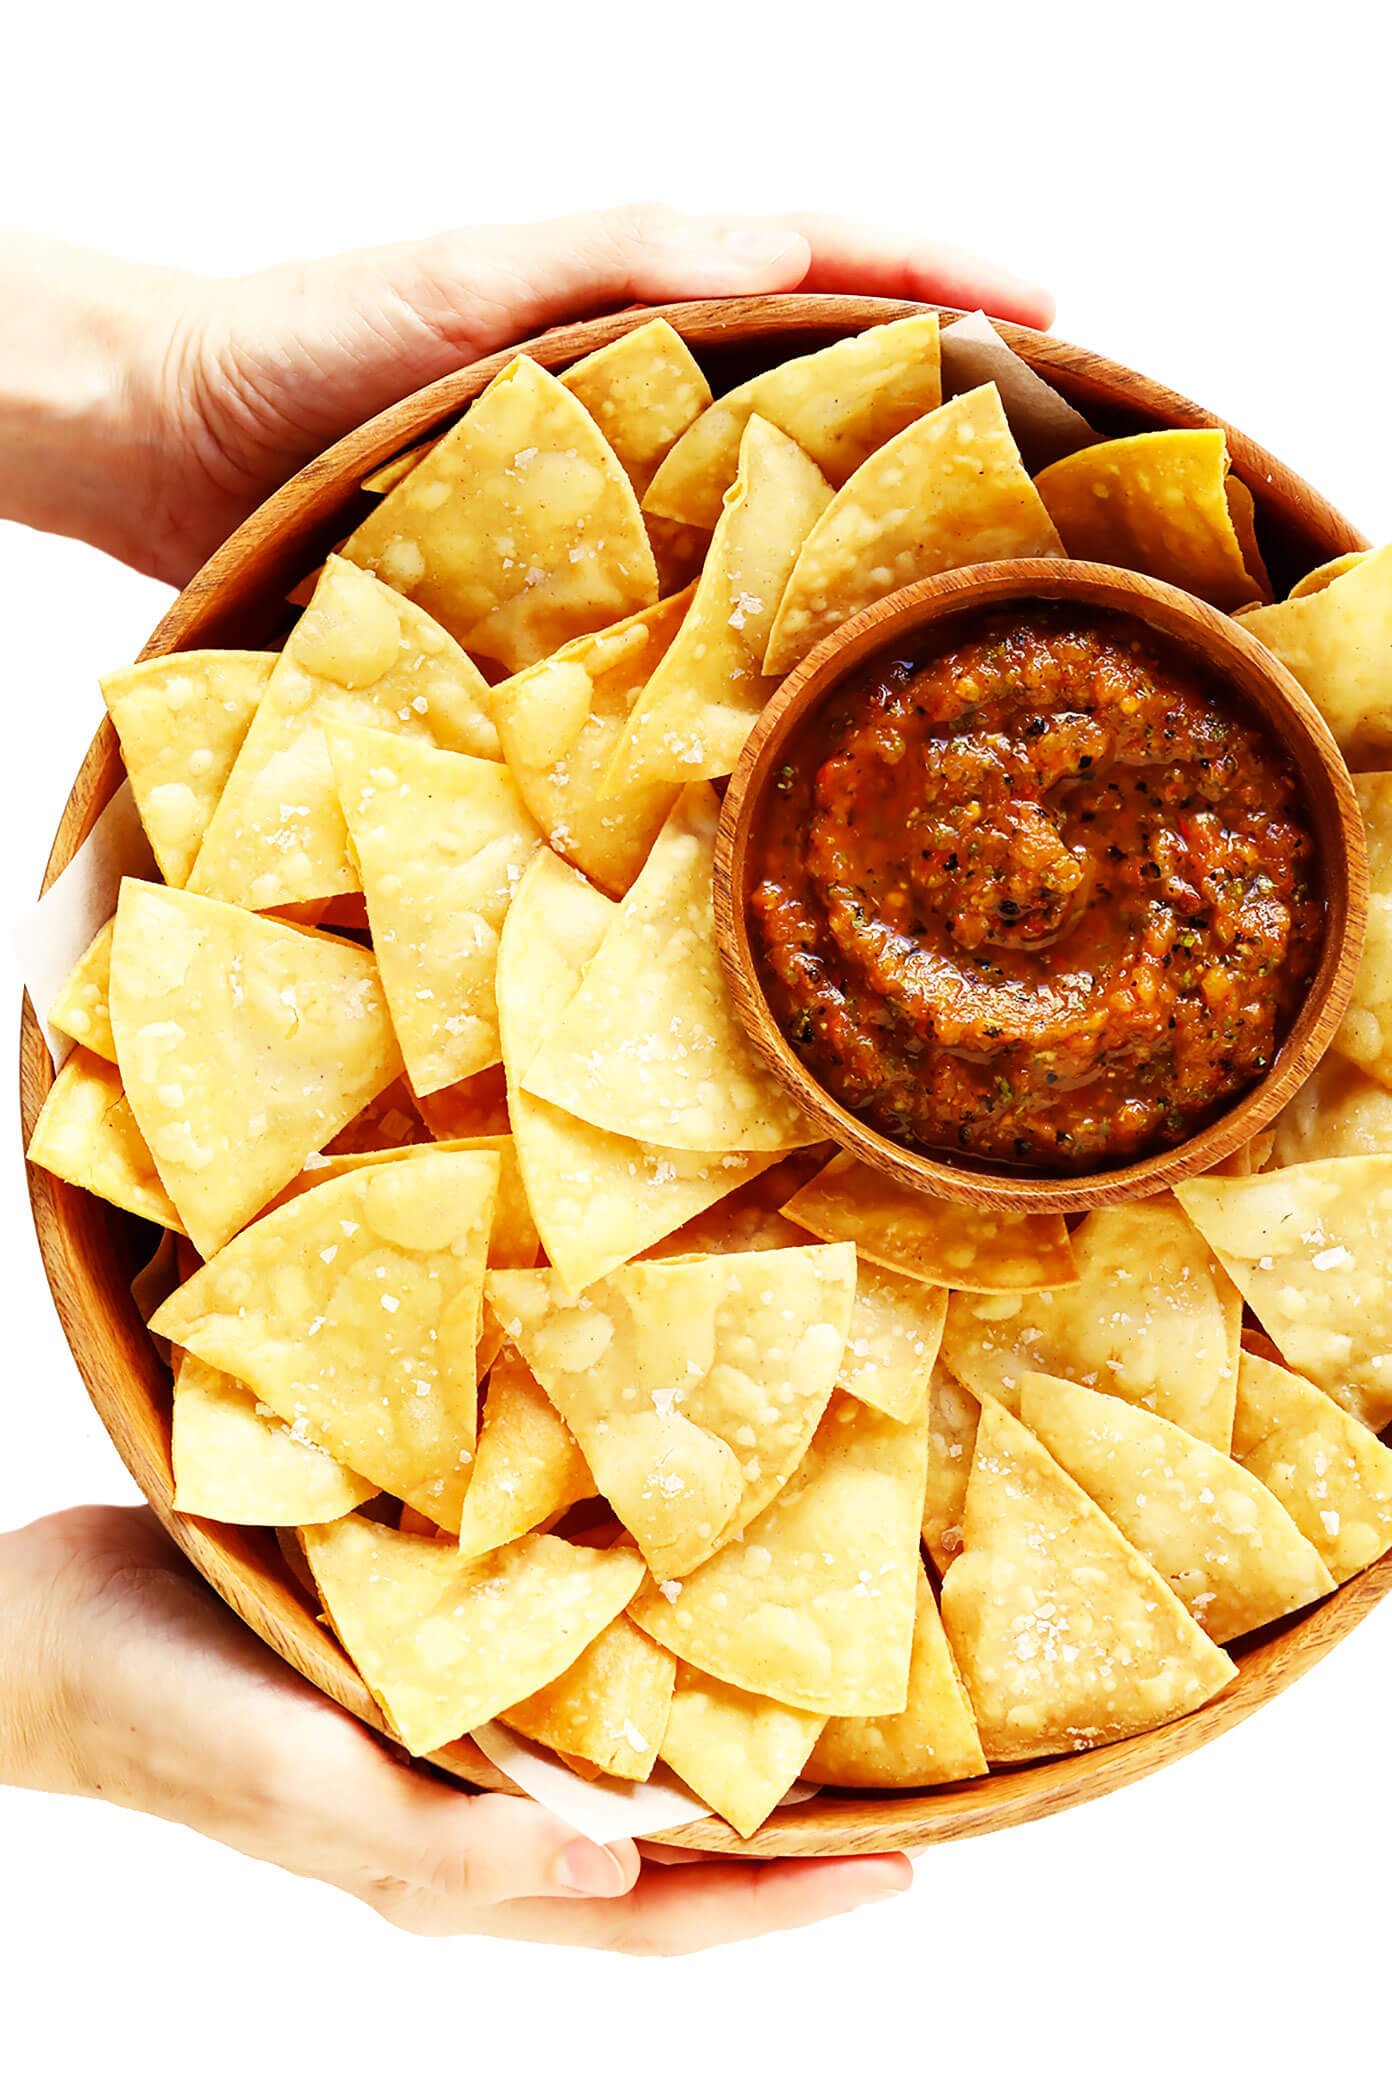 Homemade Tortilla Chips Recipe | Gimme Some Oven